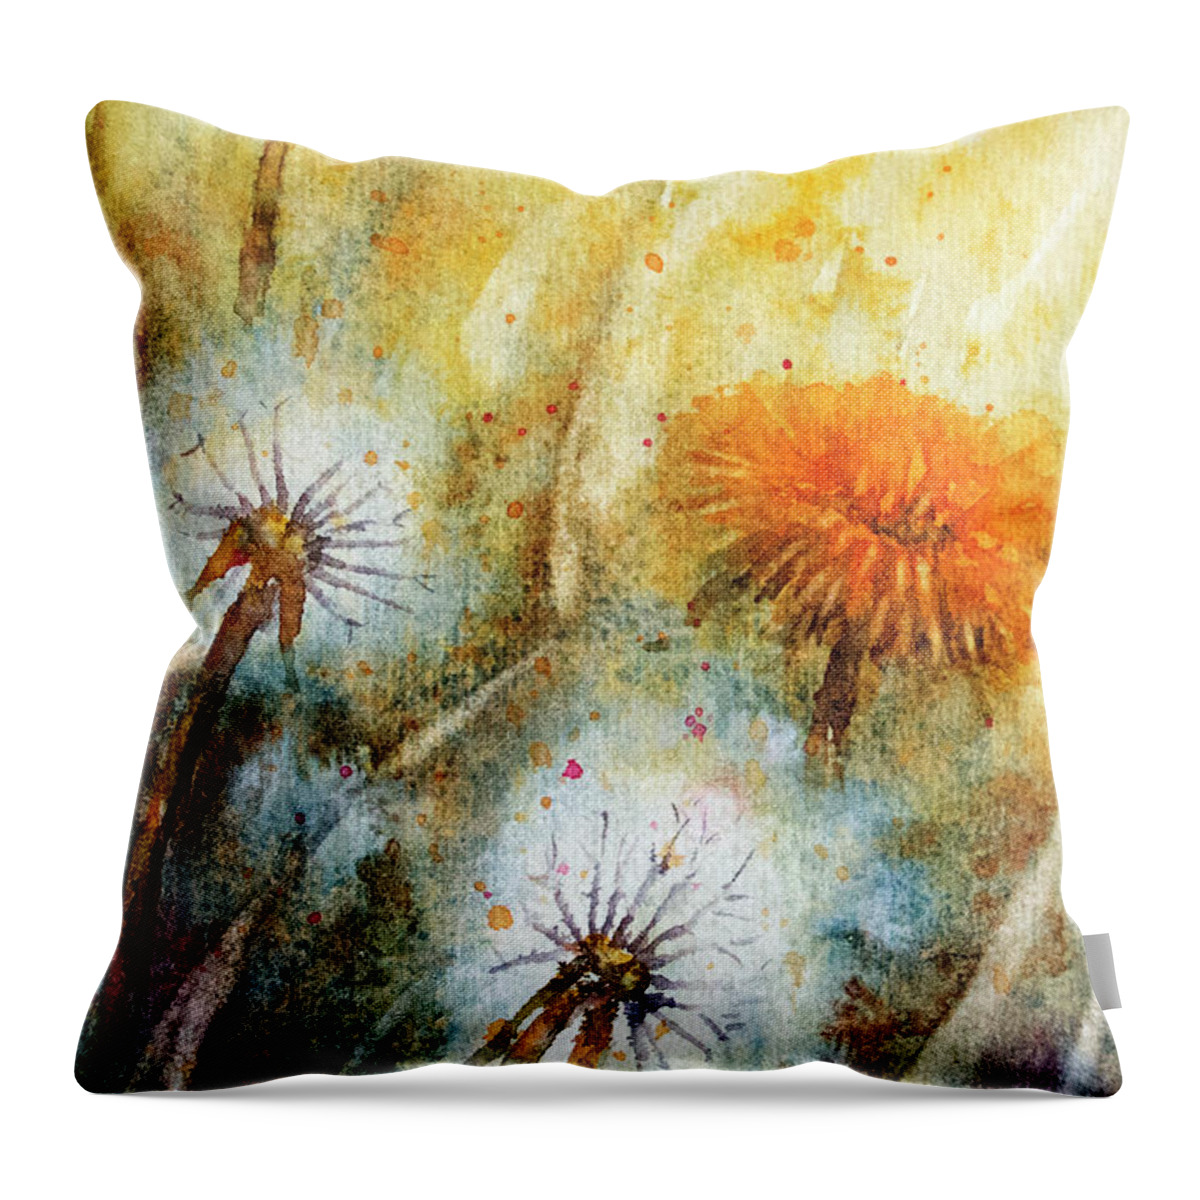 Dandelions Throw Pillow featuring the painting Dandelions by Rebecca Davis